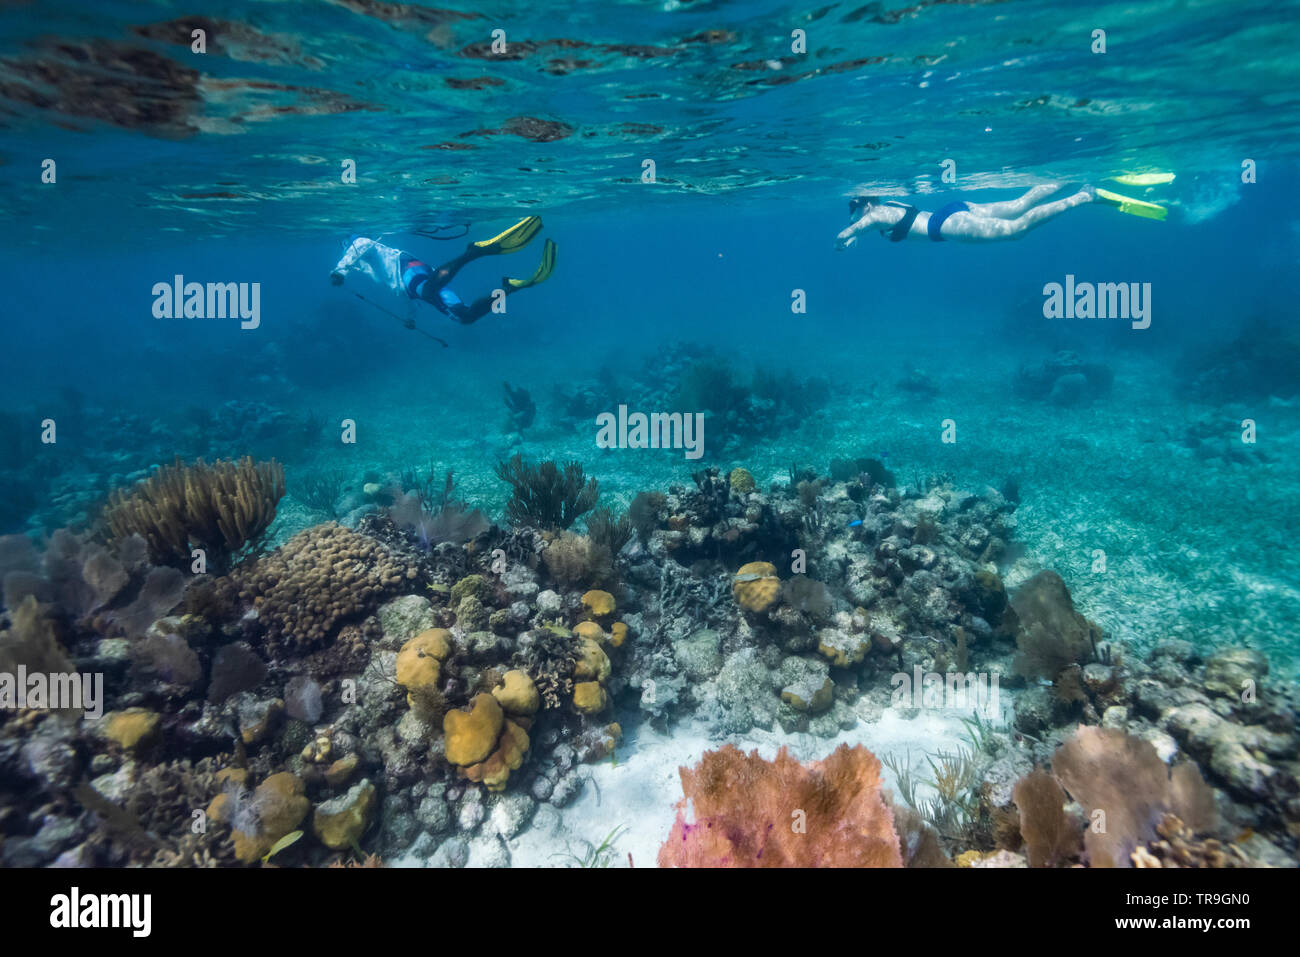 Tourists snorkeling, Turneffe Atoll, Belize Barrier Reef, Belize Stock Photo